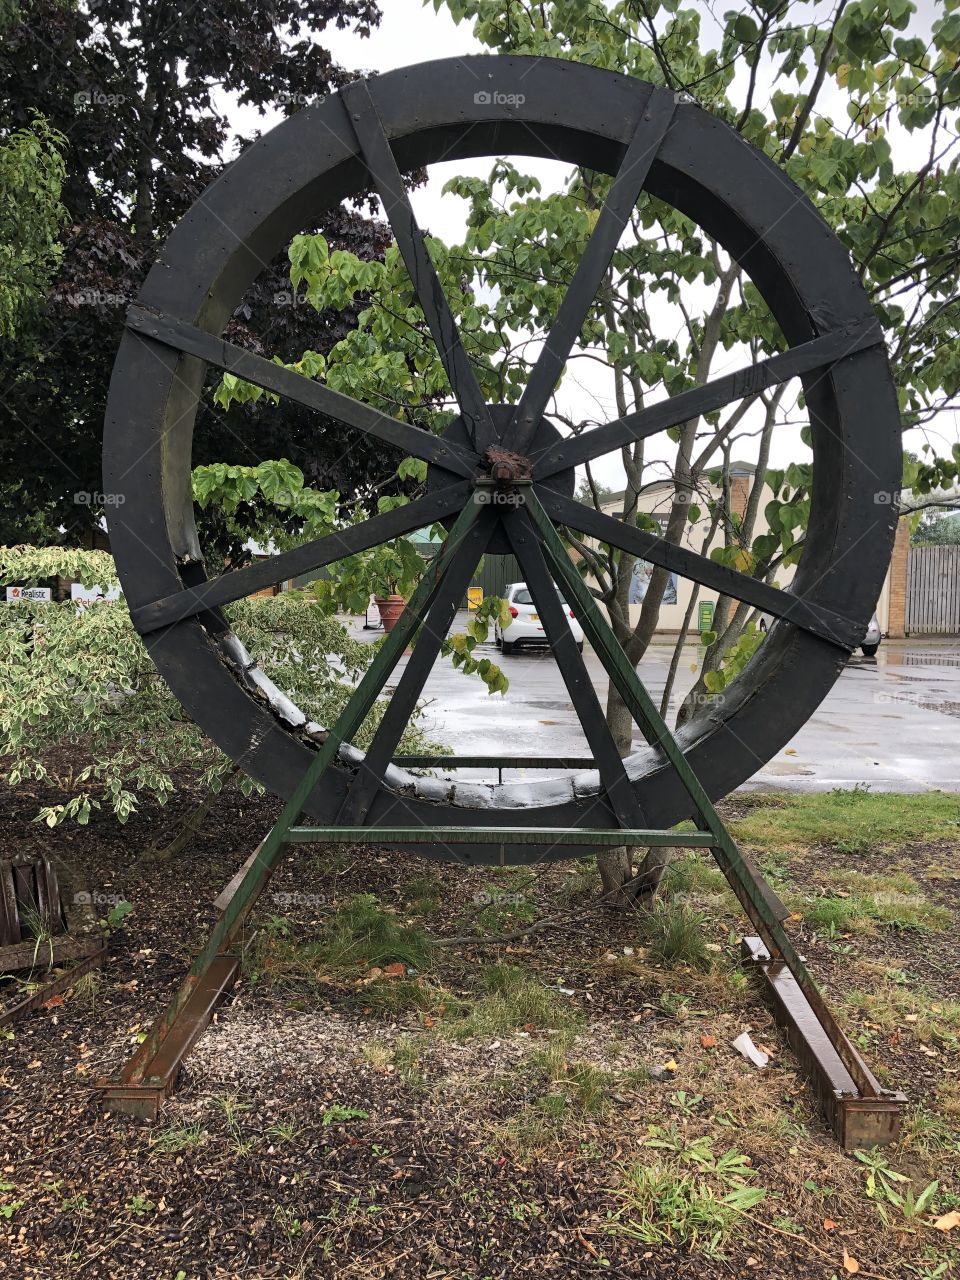 An impressive “water wheel” found in the grounds of a popular garden Centre in Somerset.